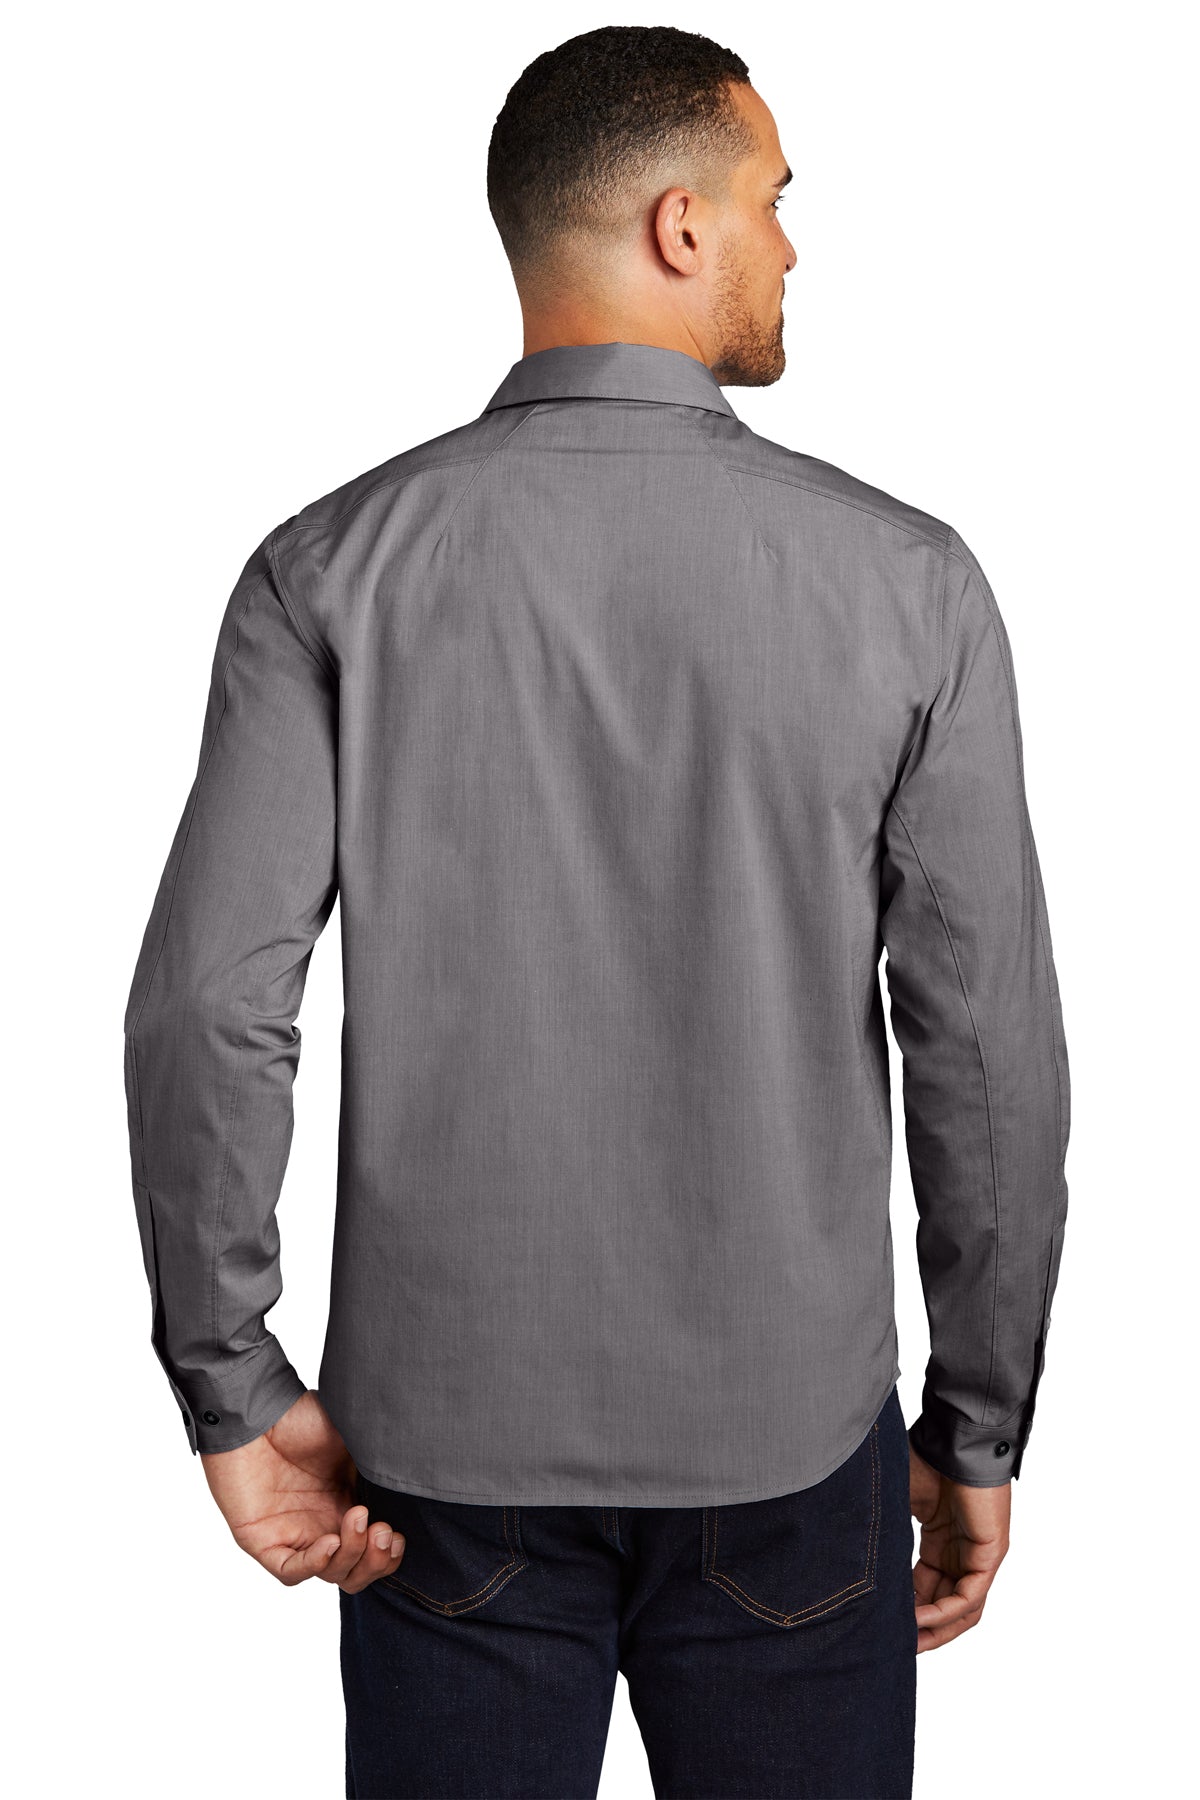 OGIO Commuter Branded Woven Shirts, Gear Grey Heather